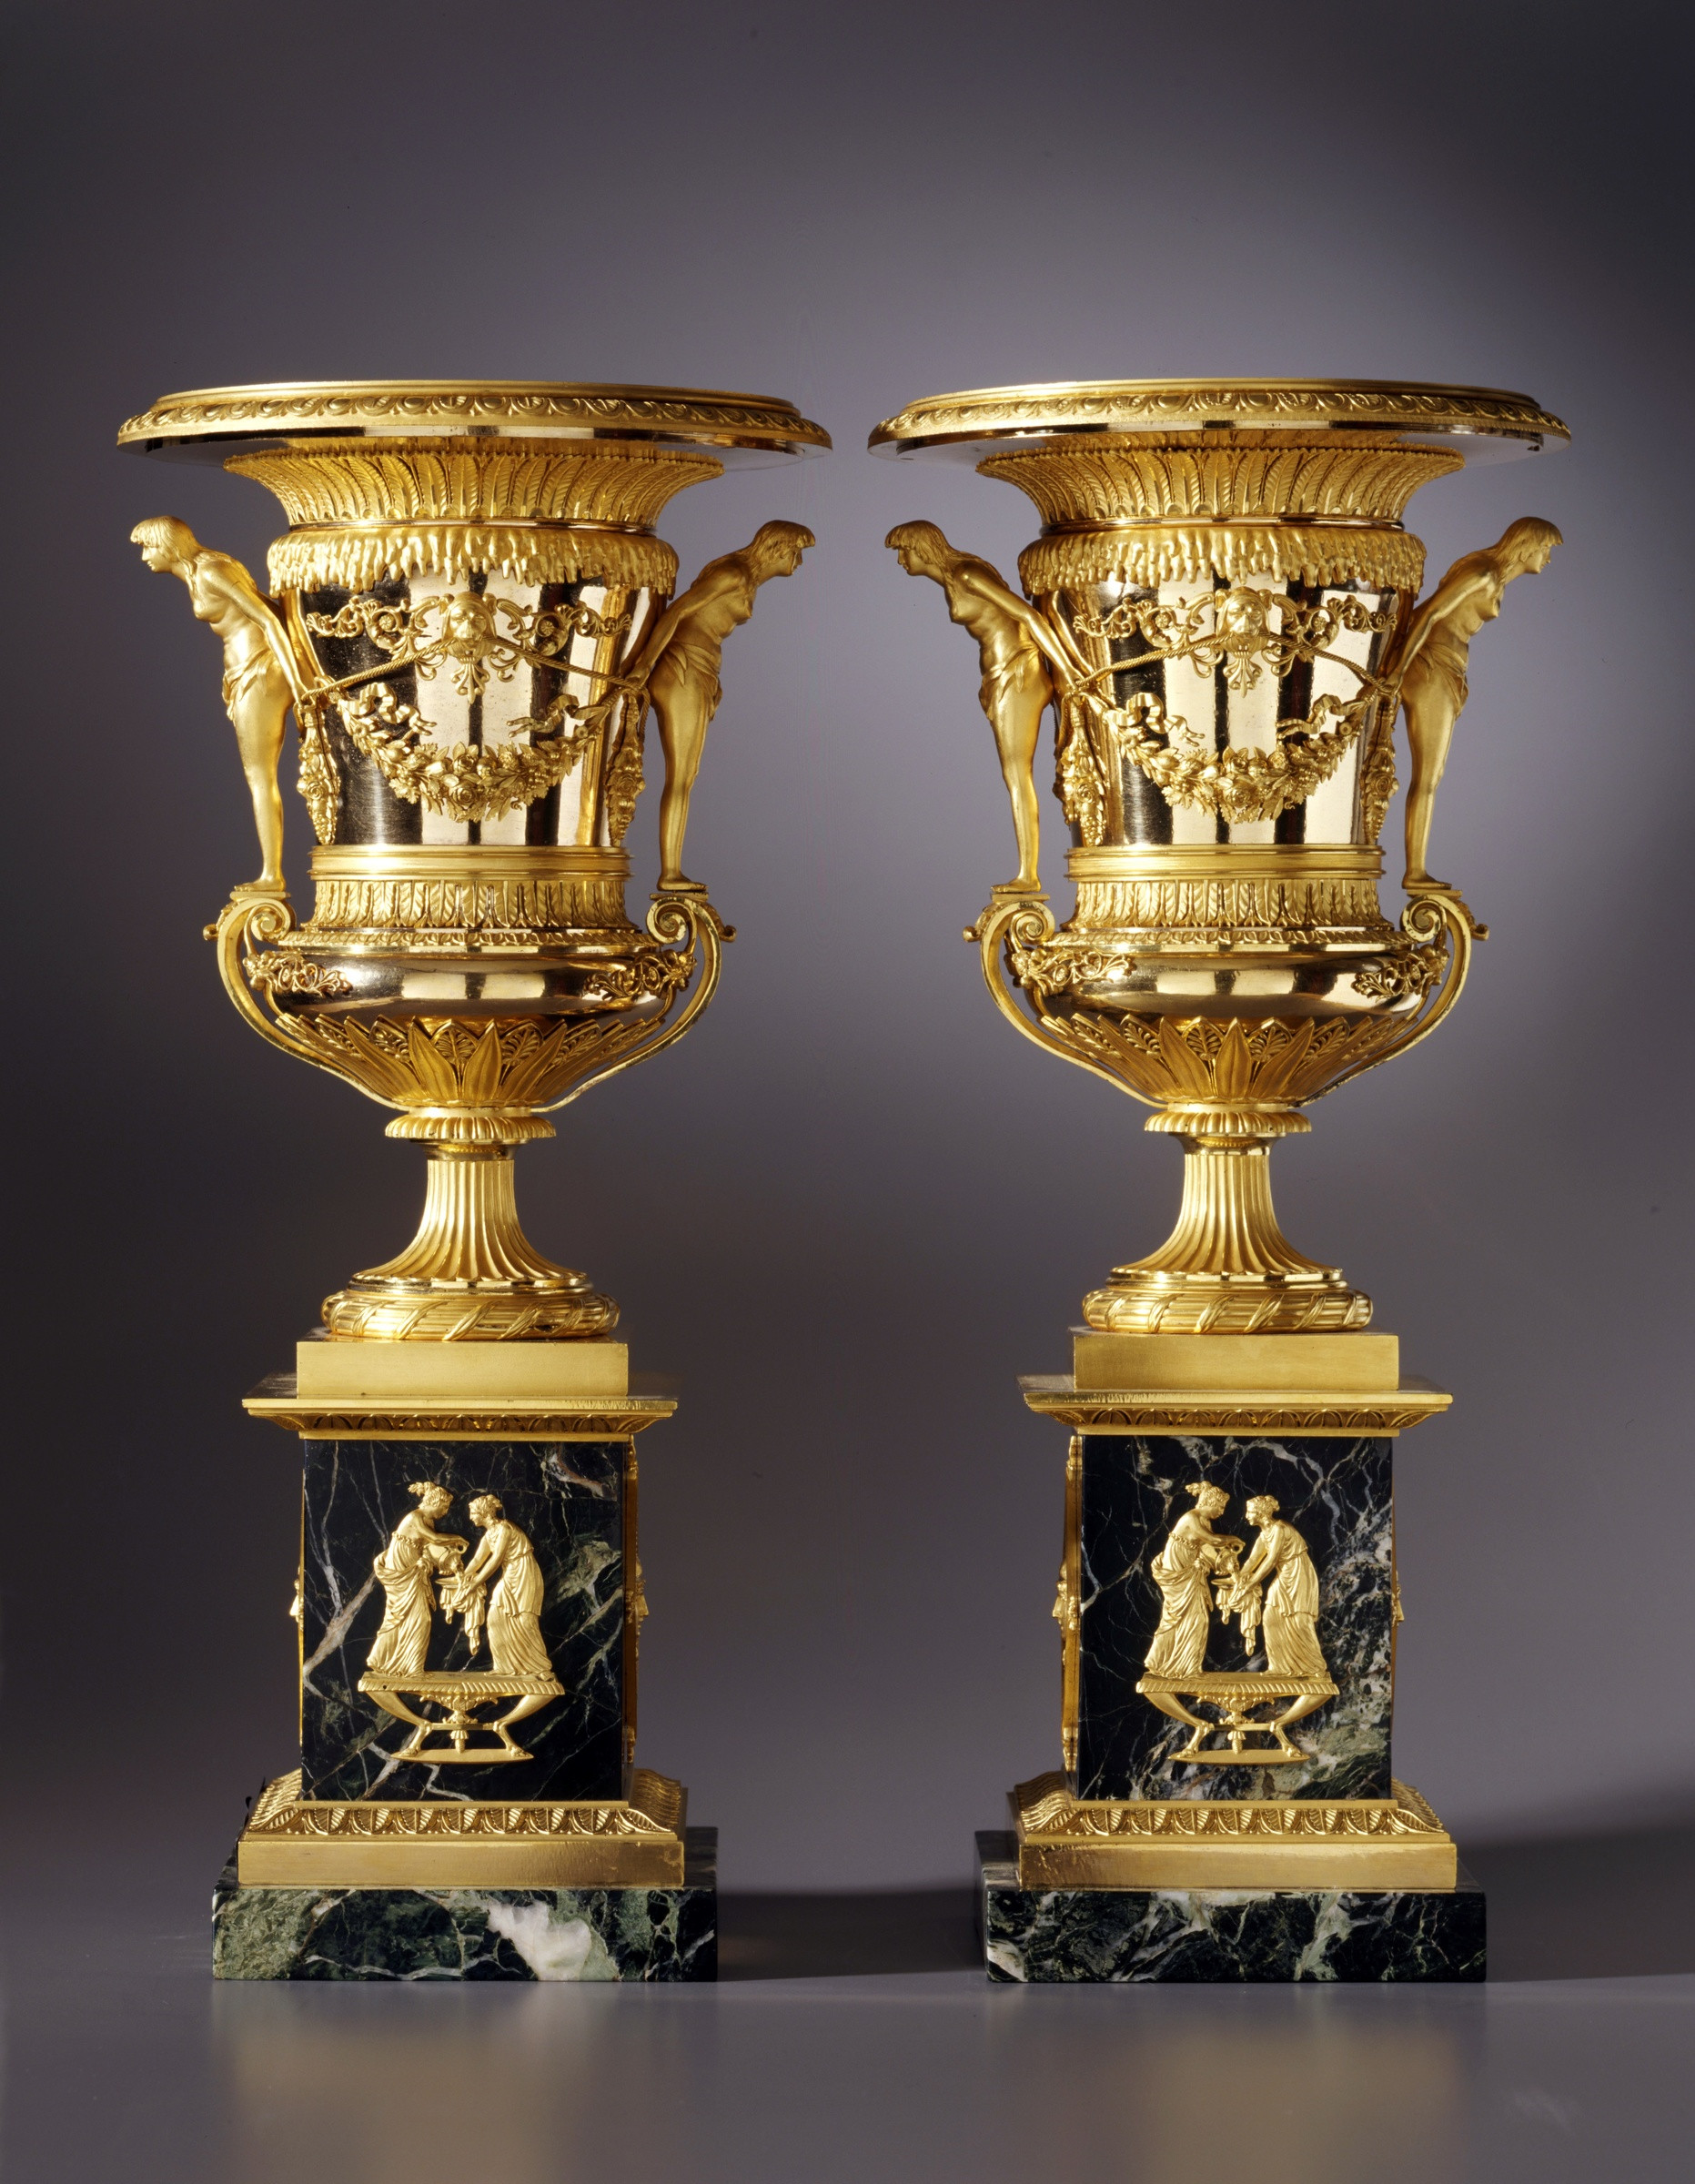 19 Recommended Galle Vase for Sale 2024 free download galle vase for sale of friedrich bergenfeldt attributed to a pair of large sized st in a pair of large sized st petersburg empire vases attributed to friedrich bergenfeldt